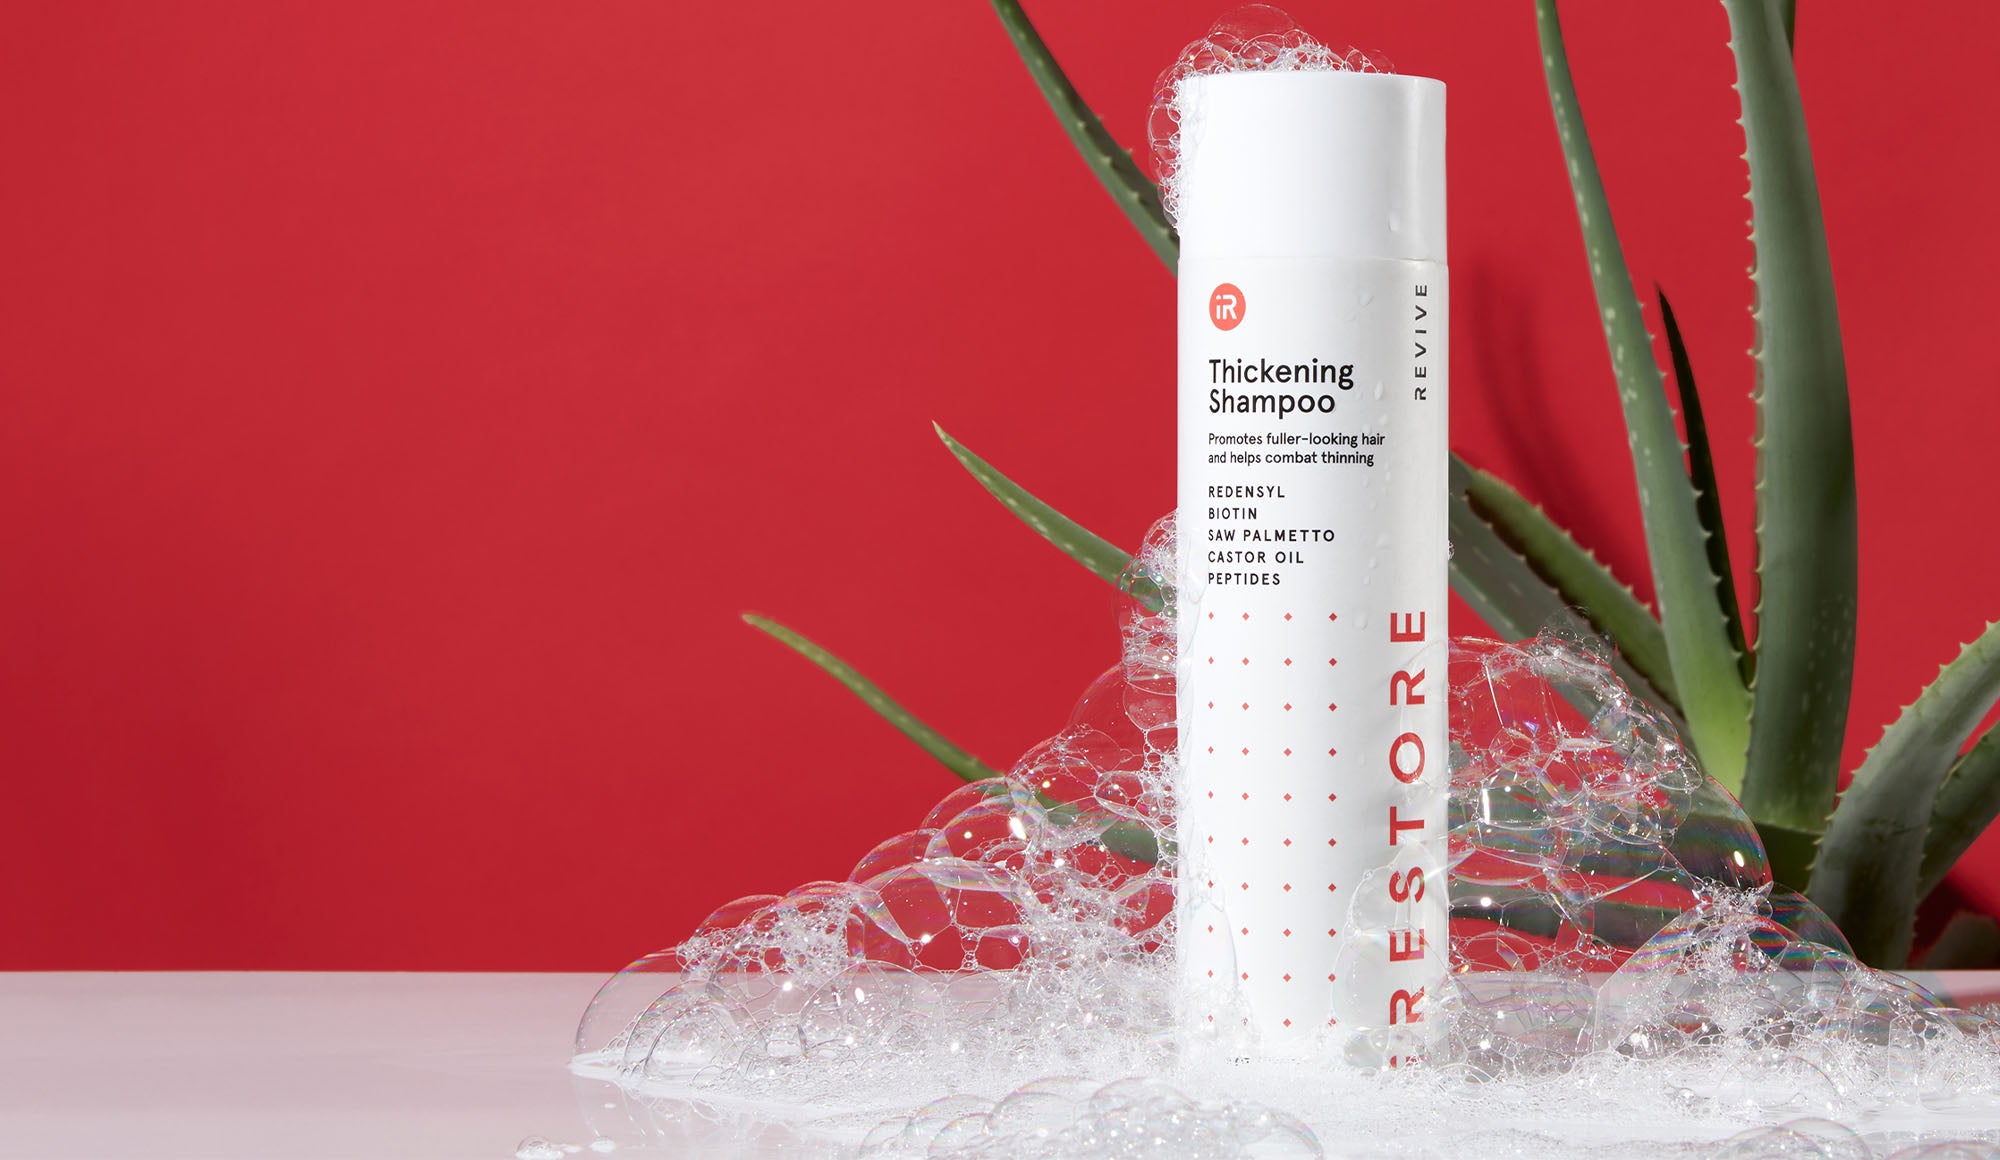 REVIVE Thickening Conditioner